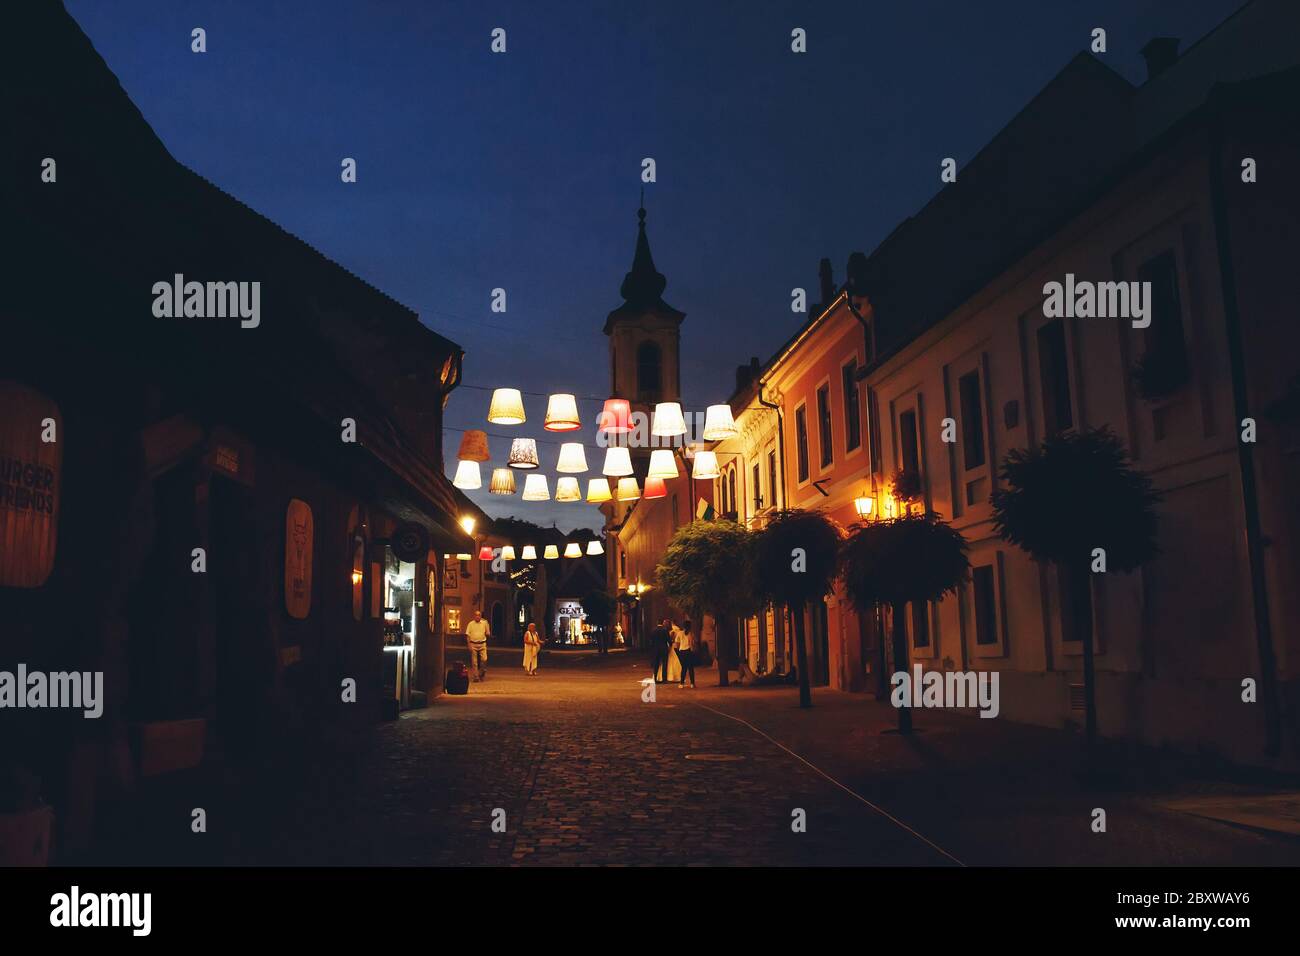 SZENTENDRE, HUNGARY - July 23, 2019 - Night view on the arty illuminated city centre of Szentendre, hungarian town full of artistic and souvenir shops Stock Photo